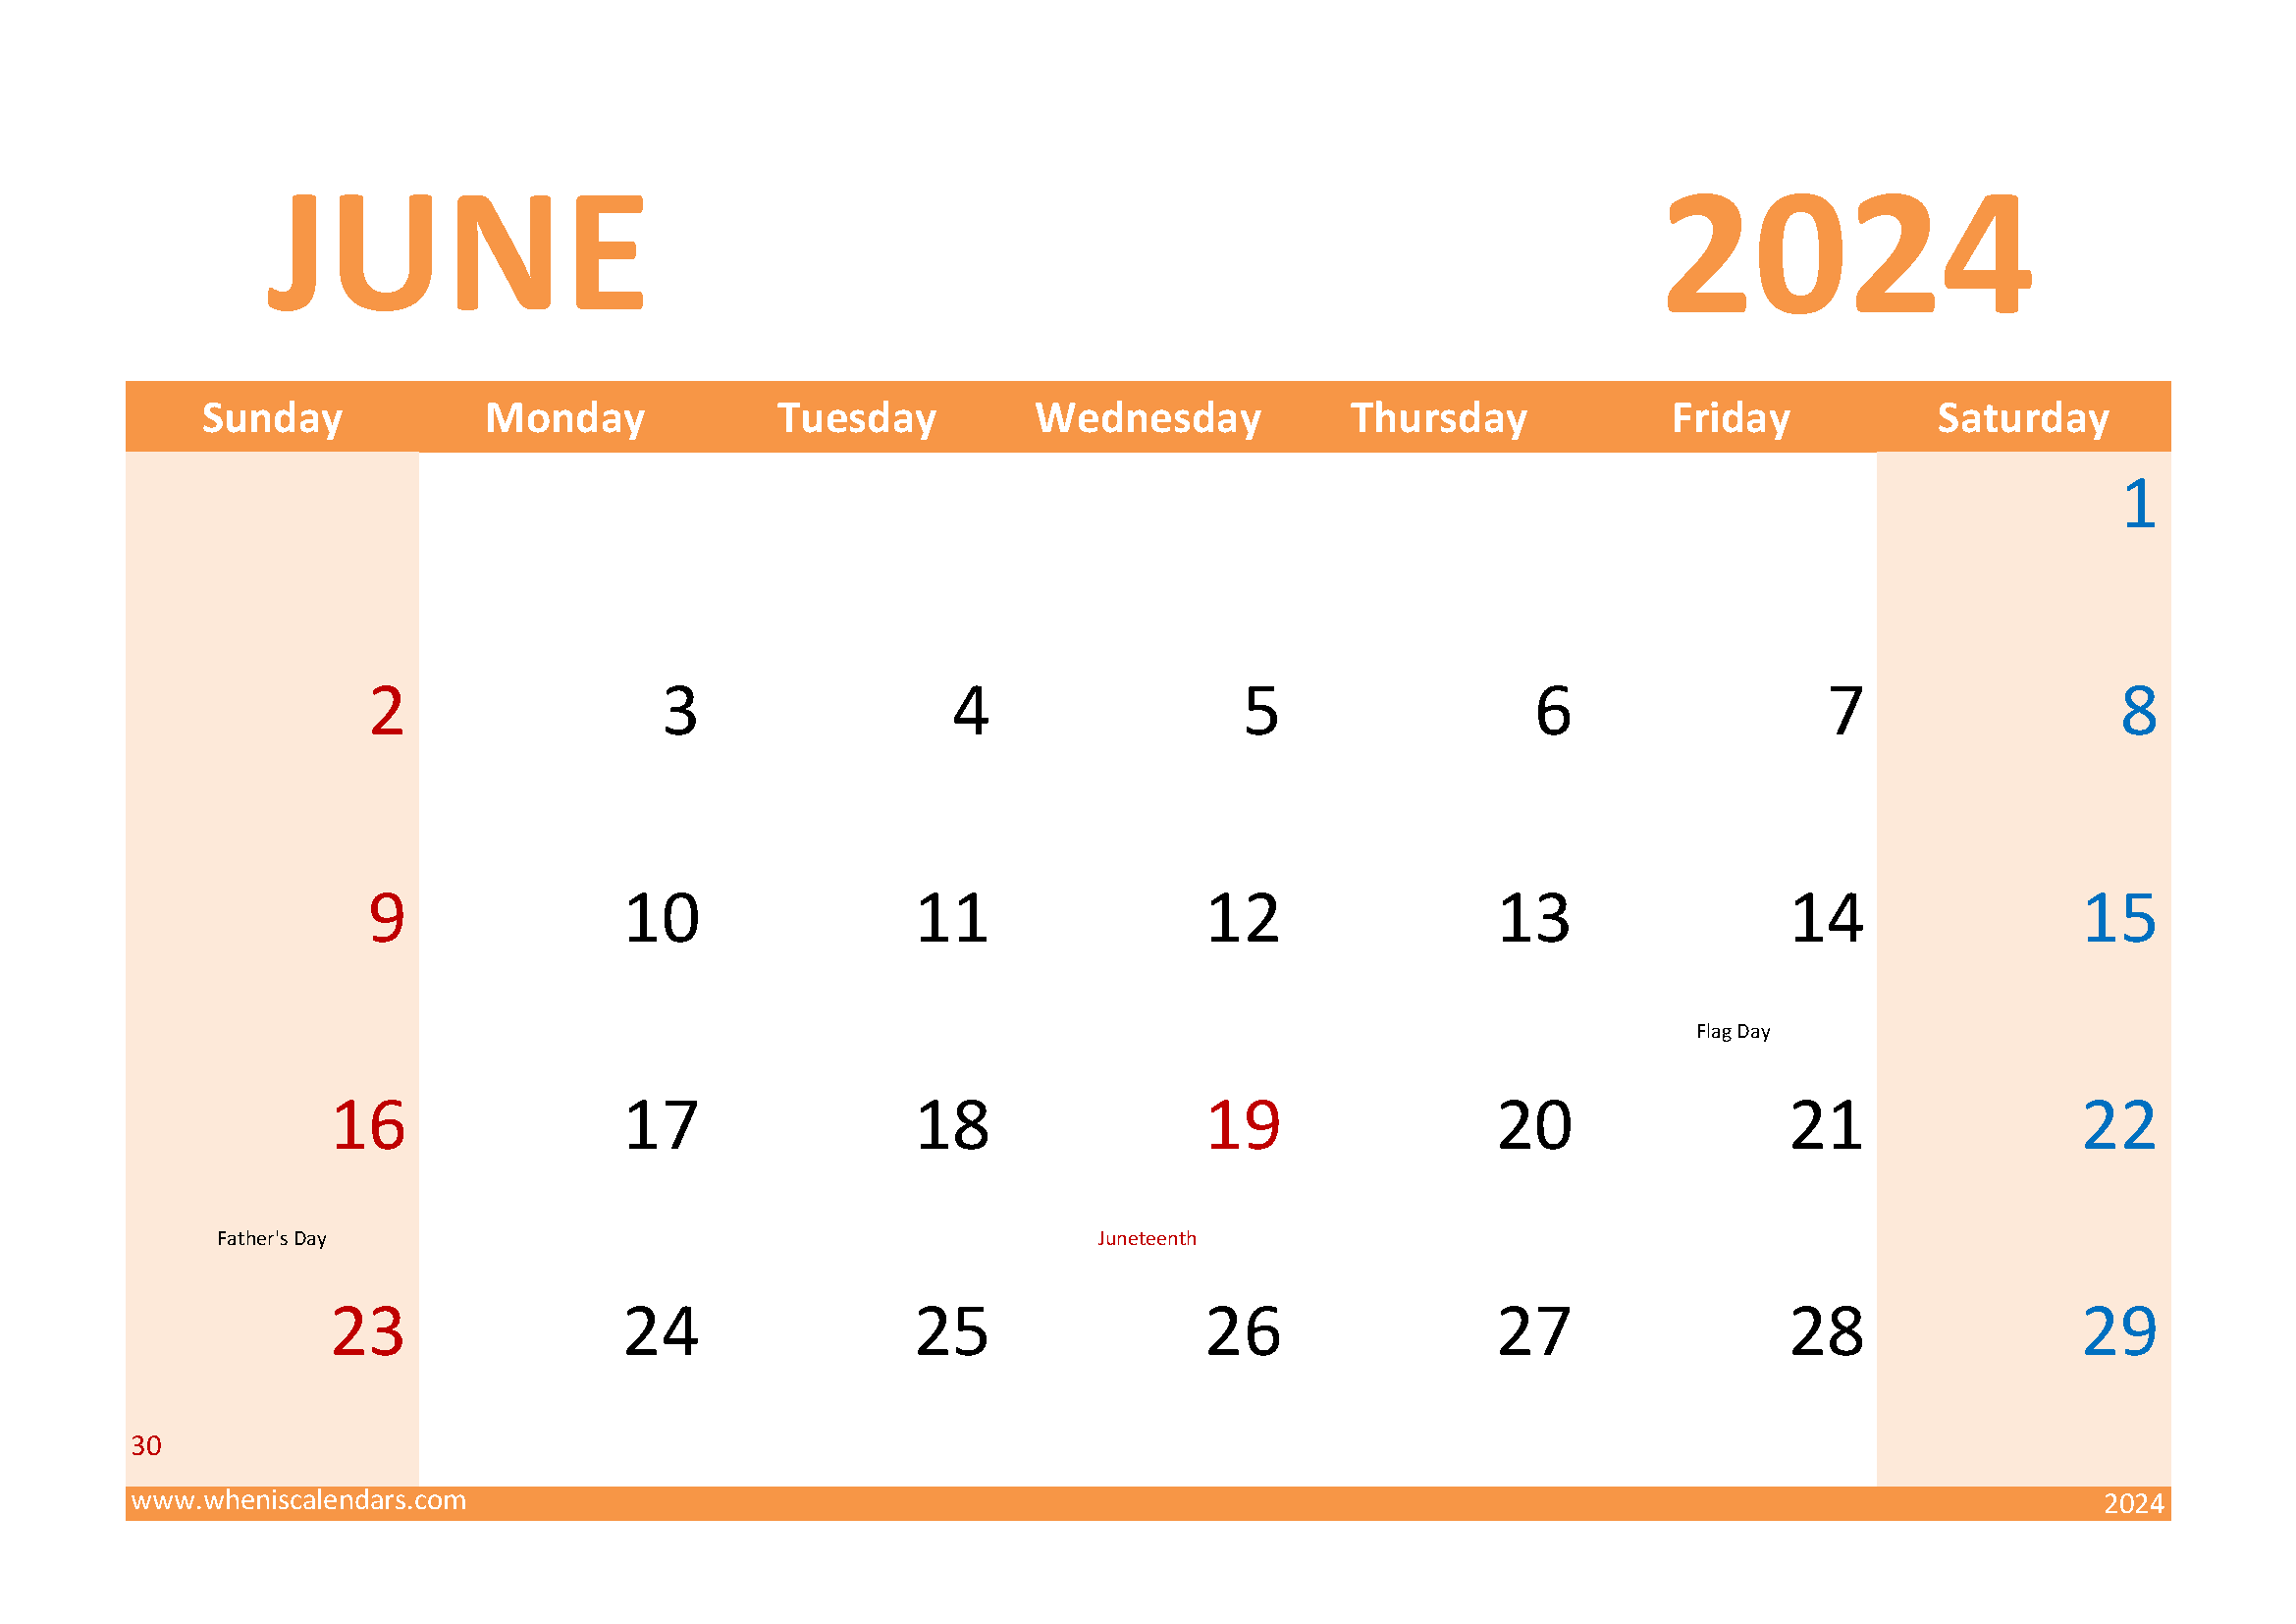 June 2024 Holidays and Special Days